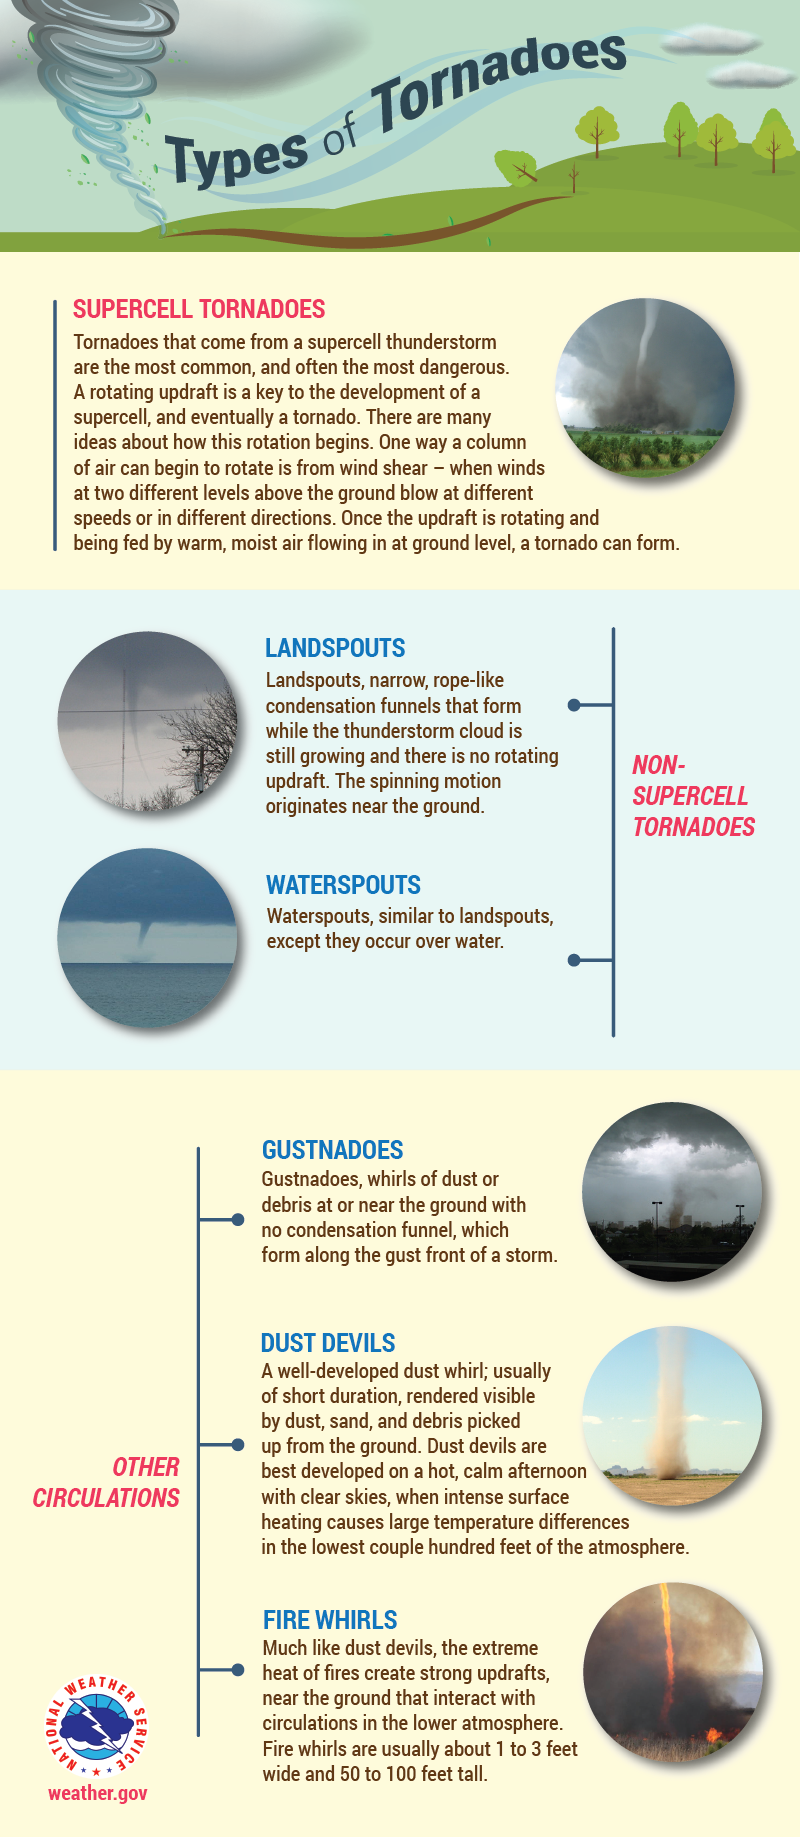 TYPES OF TORNADOES -
Supercell Tornadoes:
Tornadoes that come from a supercell thunderstorm are the most common, and often the most dangerous. A rotating updraft is a key to the development of a supercell, and eventually a tornado. There are many ideas about how this rotation begins. One way a column of air can begin to rotate is from wind shear – when winds at two different levels above the ground blow at different speeds or in different directions. Once the updraft is rotating and being fed by warm, moist air flowing in at ground level, a tornado can form.

Landspouts:
Landspouts, narrow, rope-like condensation funnels that form while the thunderstorm cloud is still growing and there is no rotating updraft. The spinning motion originates near the ground.

Waterspouts:
Waterspouts, similar to landspouts, except they occur over water.

Gustnadoes:
Gustnadoes, whirls of dust or debris at or near the ground with no condensation funnel, which form along the gust front of a storm.

Dust Devils:
A well-developed dust whirl; usually of short duration, rendered visible by dust, sand, and debris picked up from the ground. Dust devils are best developed on a hot, calm afternoon with clear skies, when intense surface heating causes large temperature differences in the lowest couple hundred feet of the atmosphere.

Fire Whirls:
Much like dust devils, the extreme heat of fires create strong updrafts, near the ground that interact with circulations in the lower atmosphere. Fire whirls are usually about 1 to 3 feet  wide and 50 to 100 feet tall.